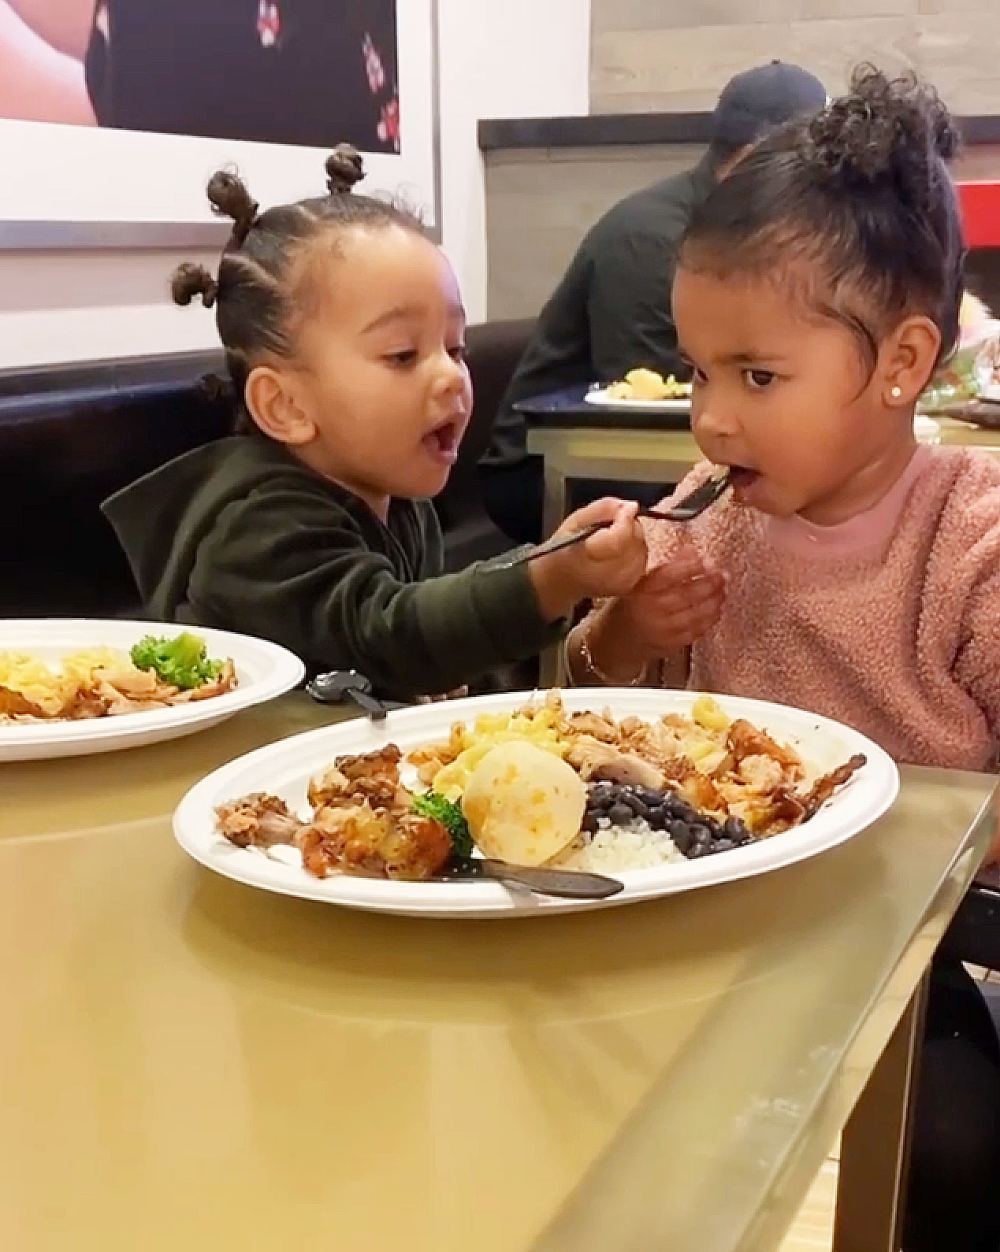 Kim Kardashians Daughter Chicago West Feeds Cousin True Thompson During Target Outing